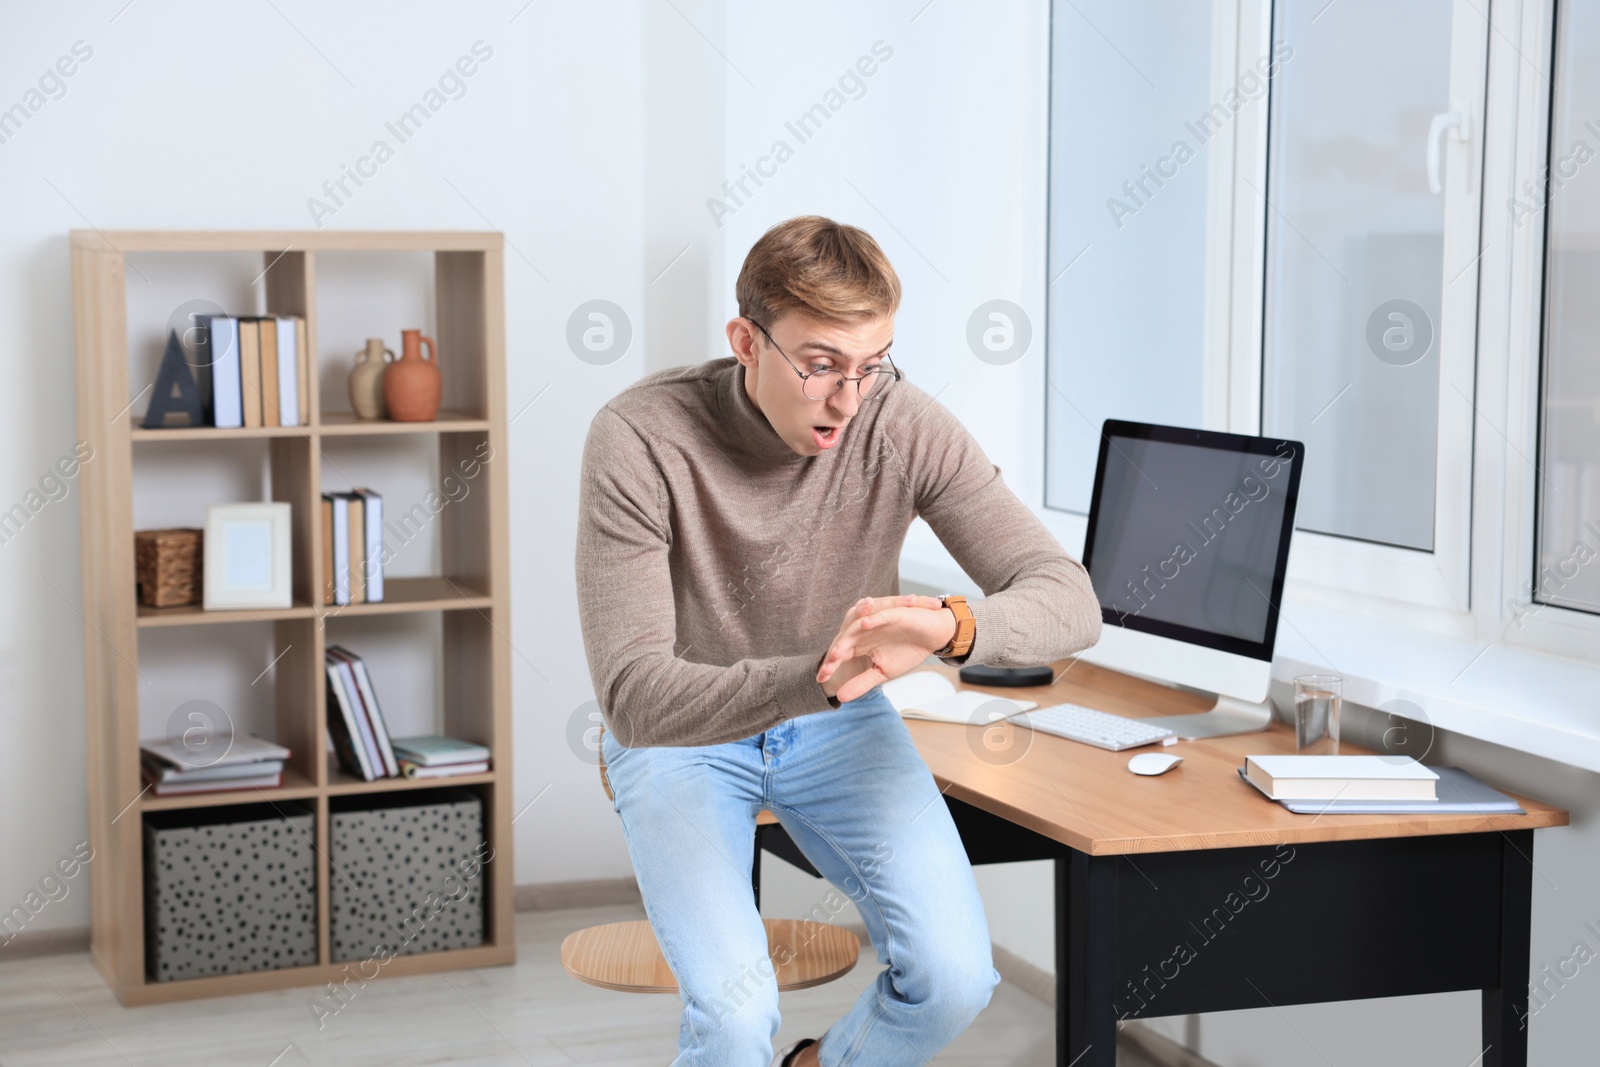 Photo of Emotional young man checking time in office. Being late